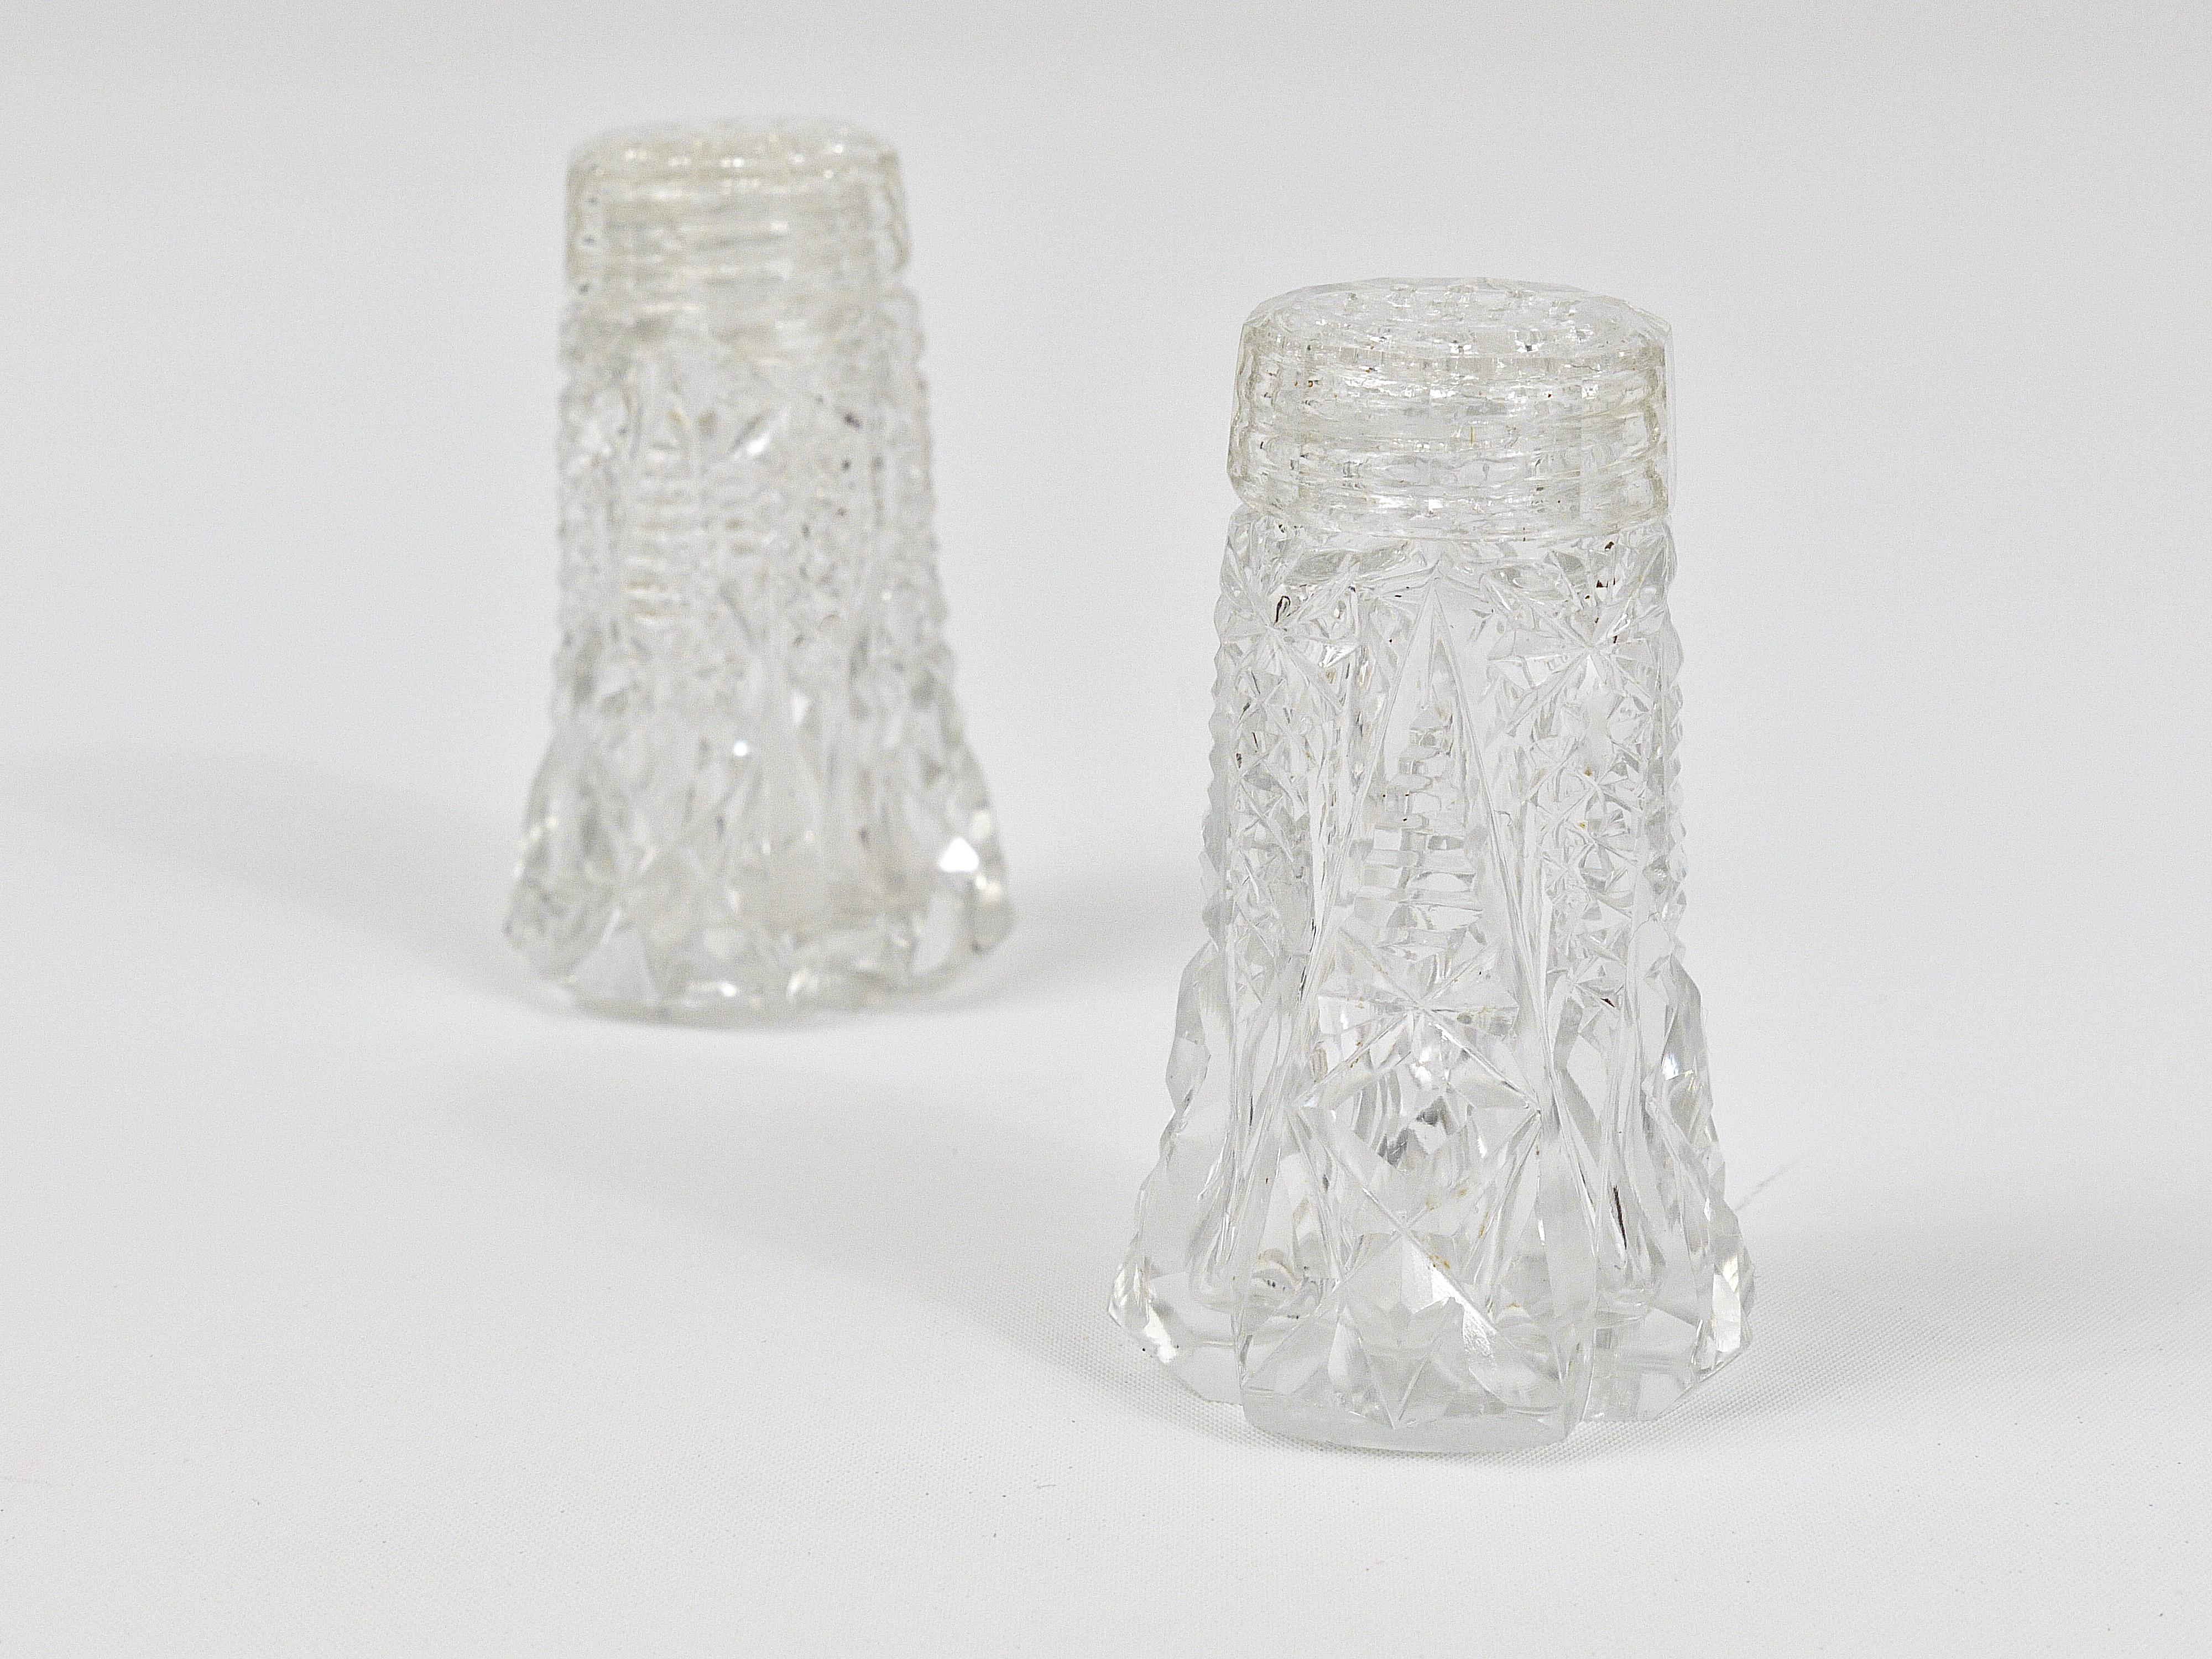 French Art Nouveau Salt and Pepper Shakers, Facetted Crysta Glass from the 1920s For Sale 1